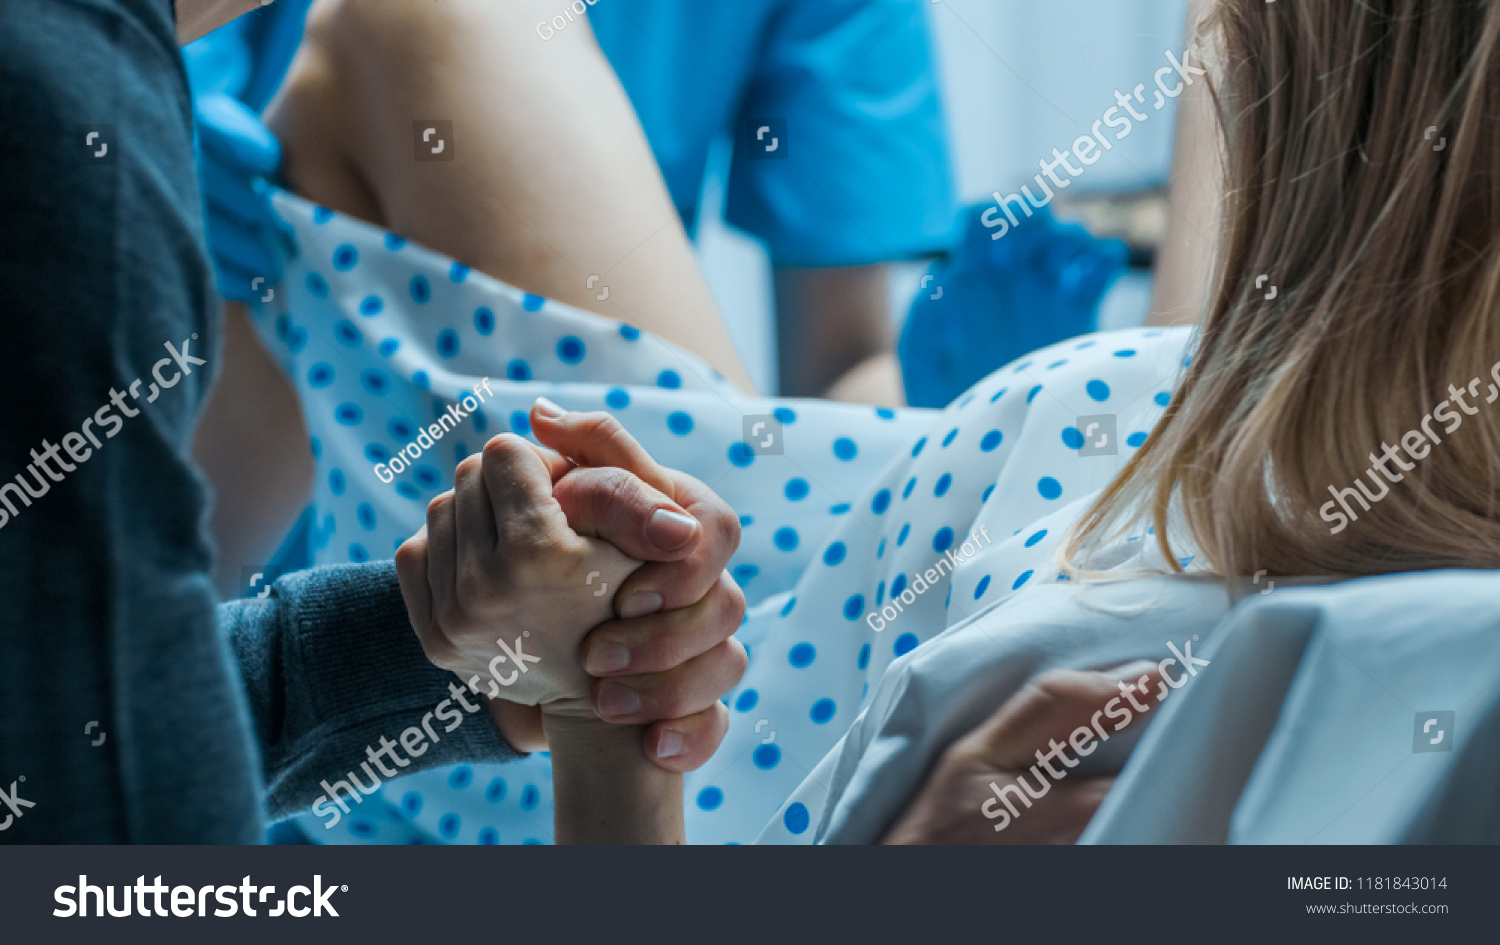 Emergency In the Hospital: Woman Giving Birth, Husband Holds Her Hand in Support, Obstetricians Assisting. Modern Delivery Ward with Professional Midwives. #1181843014